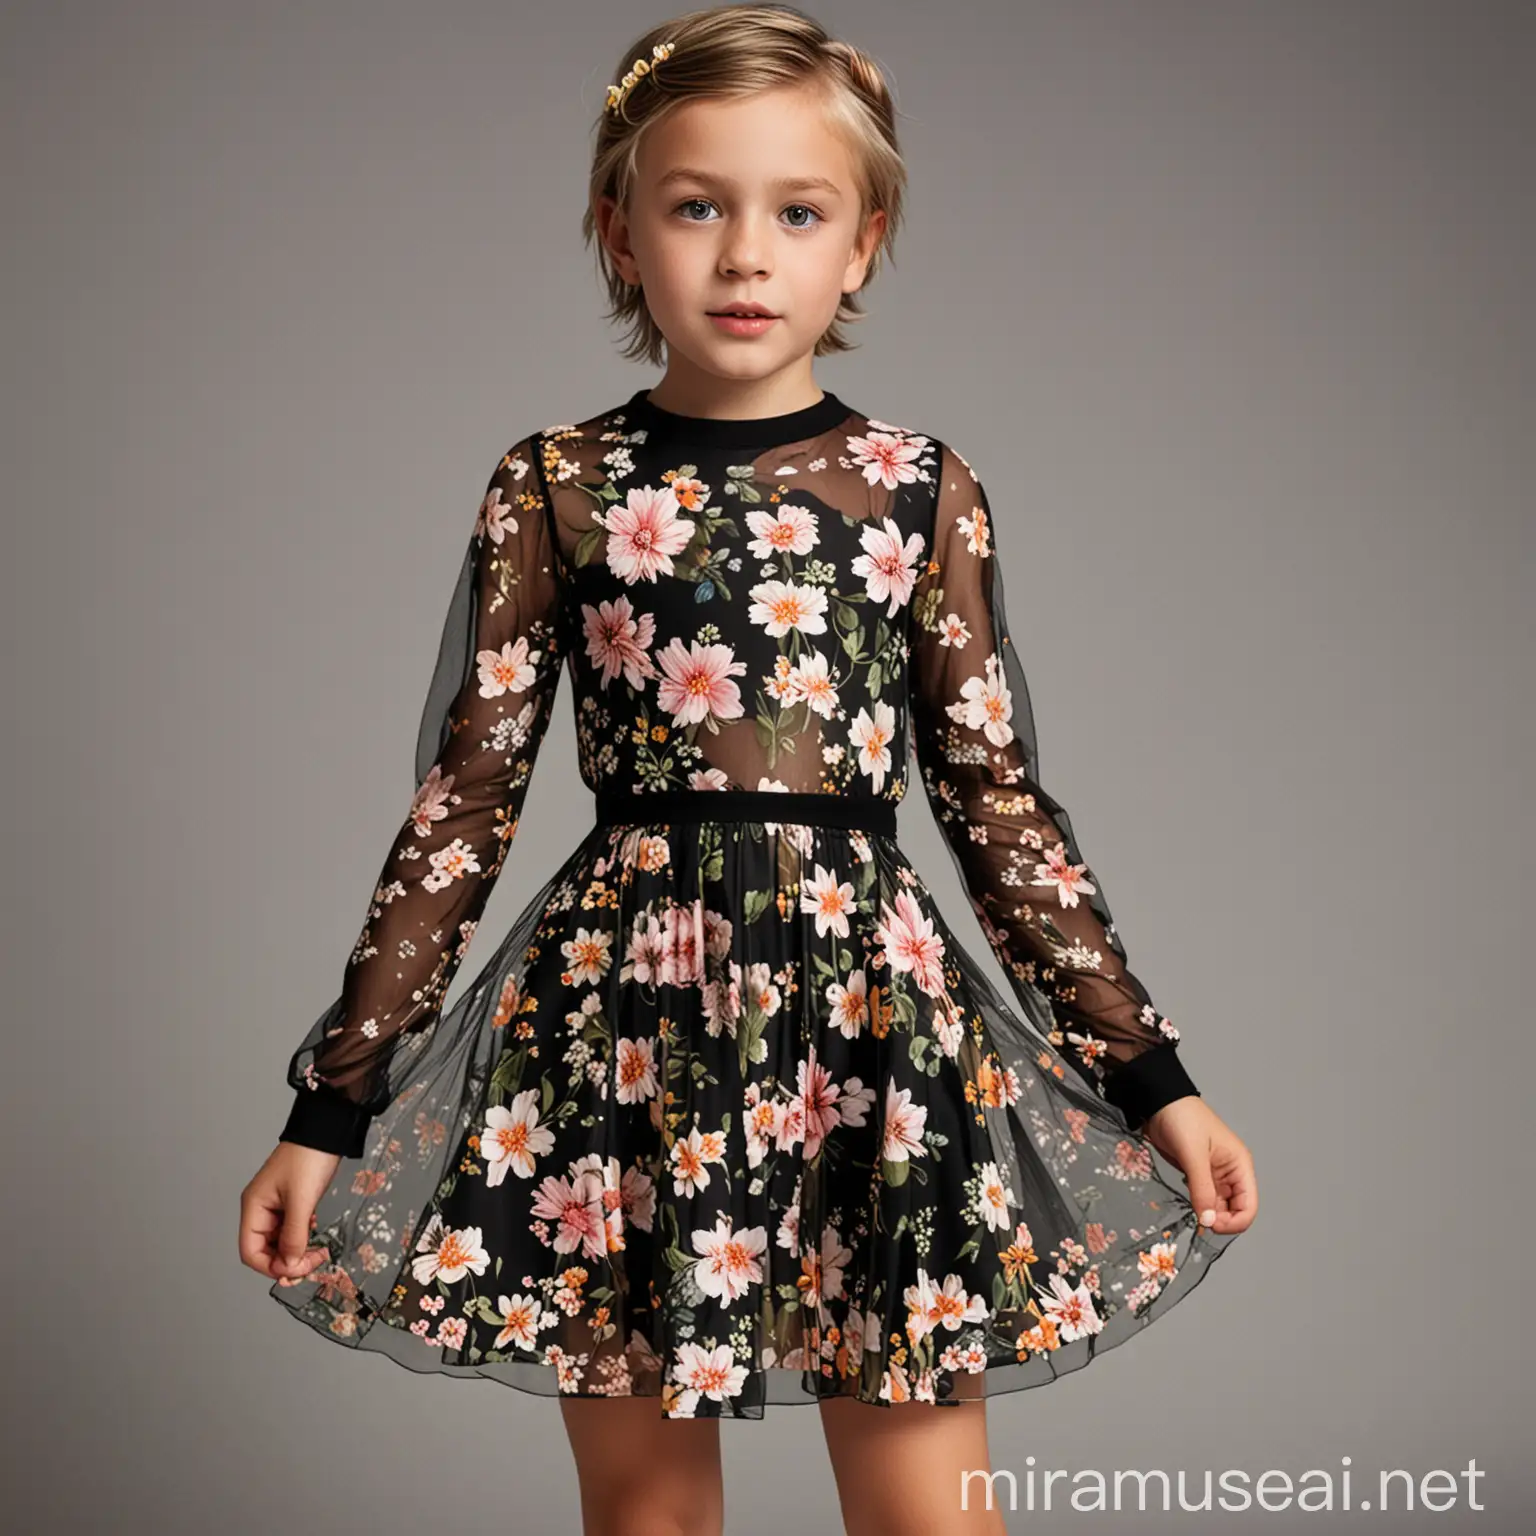 Adorable Young Boy in Floral Skater Dress